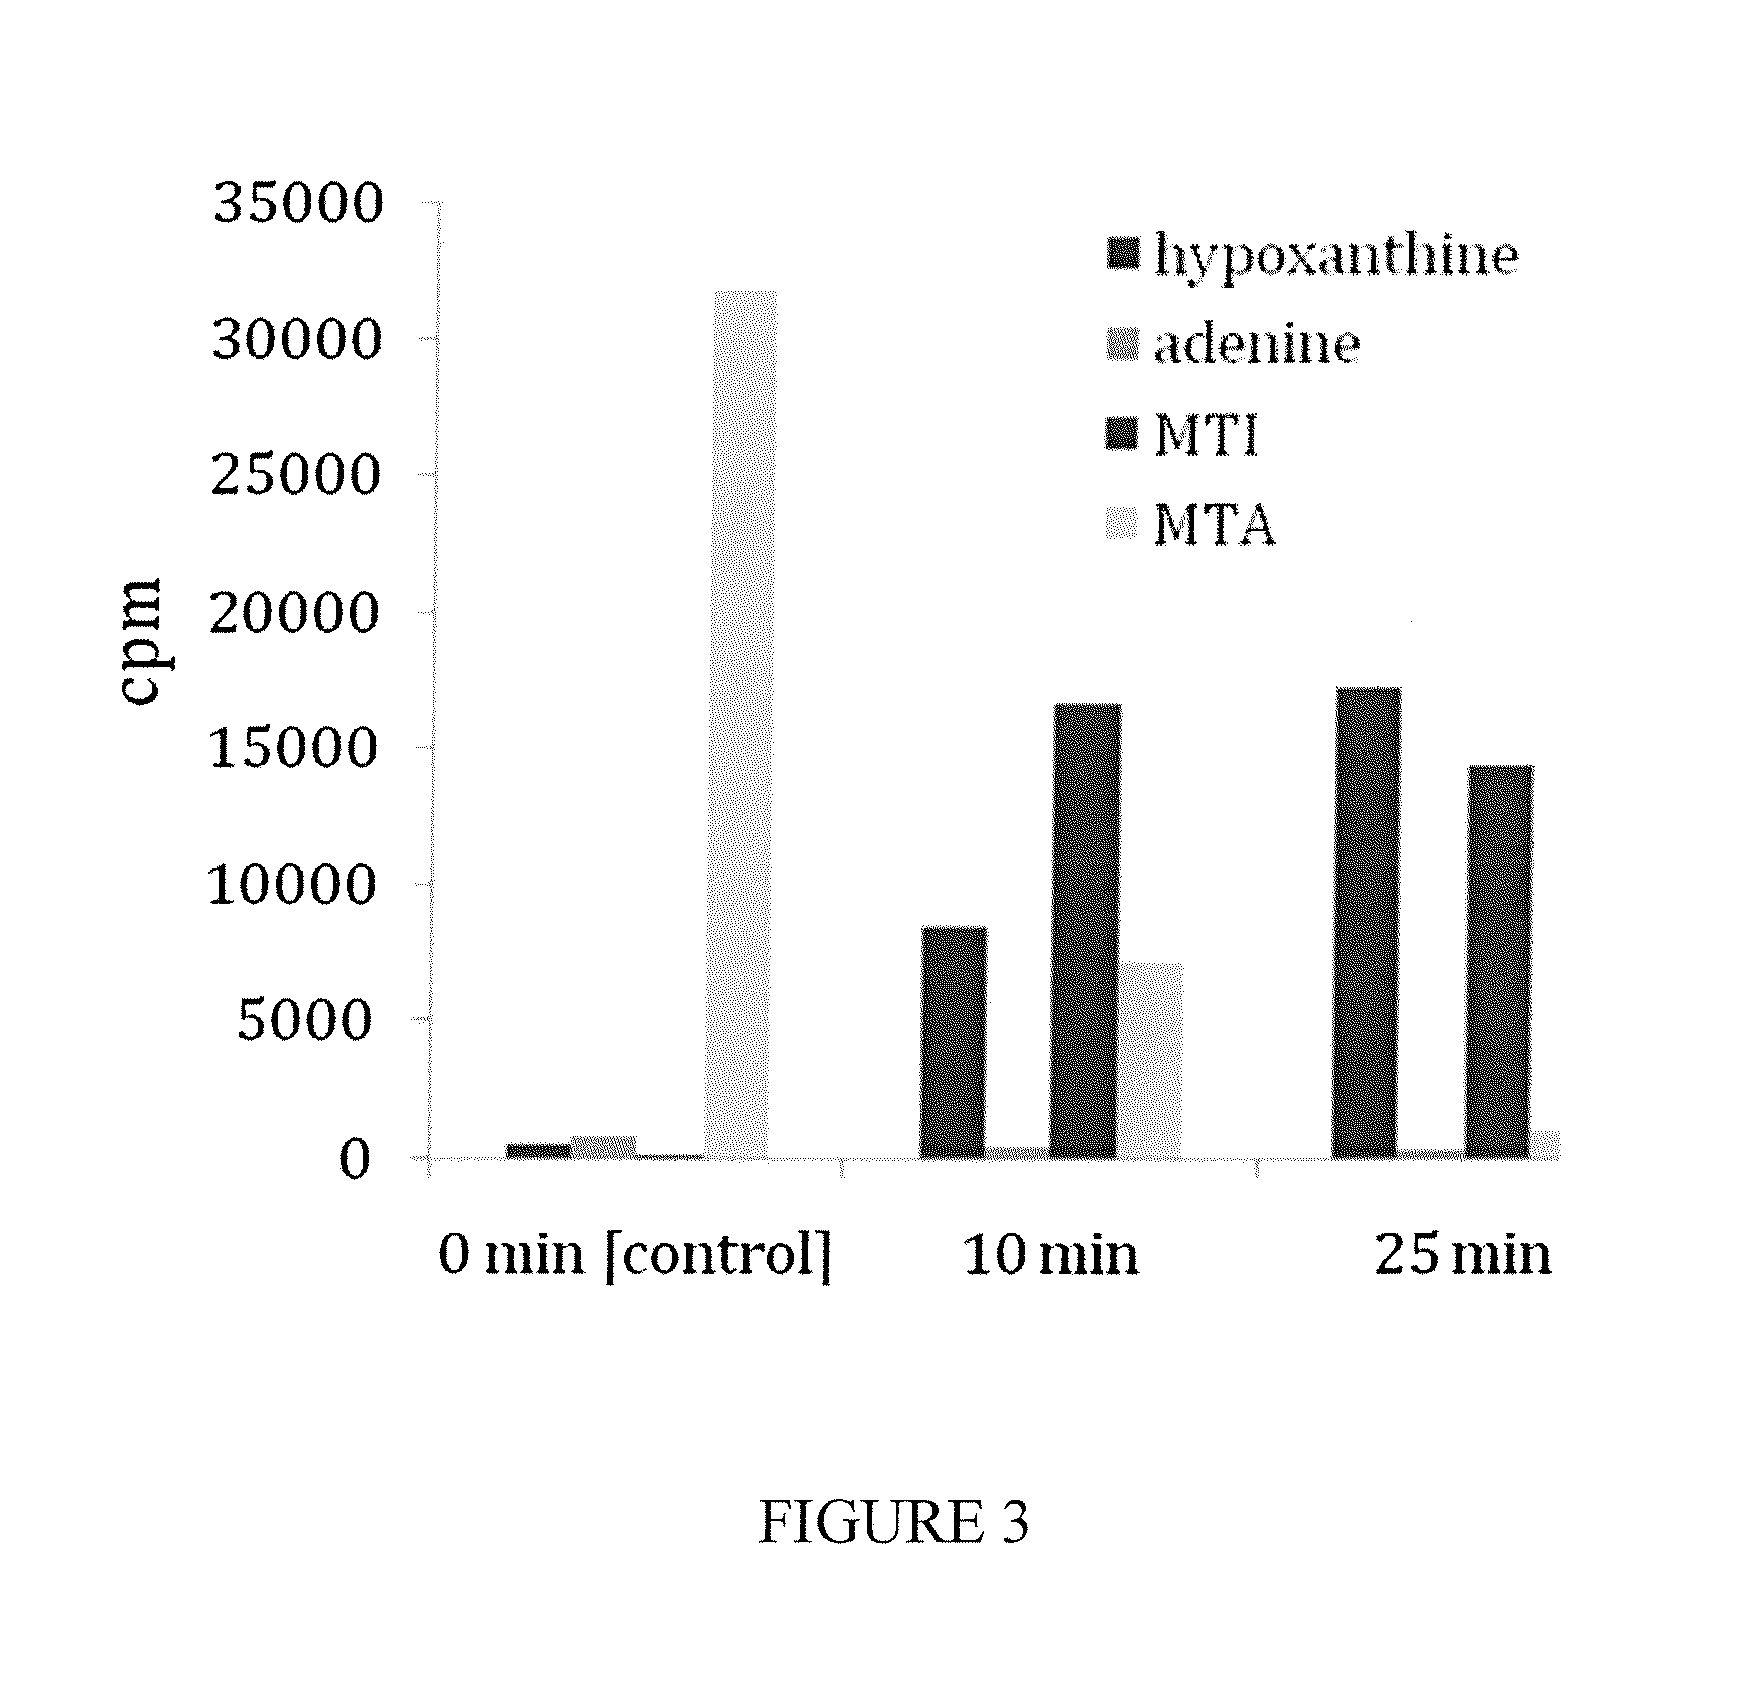 Methods, assays and compounds for treating bacterial infections by inhibiting methylthioinosine phosphorylase